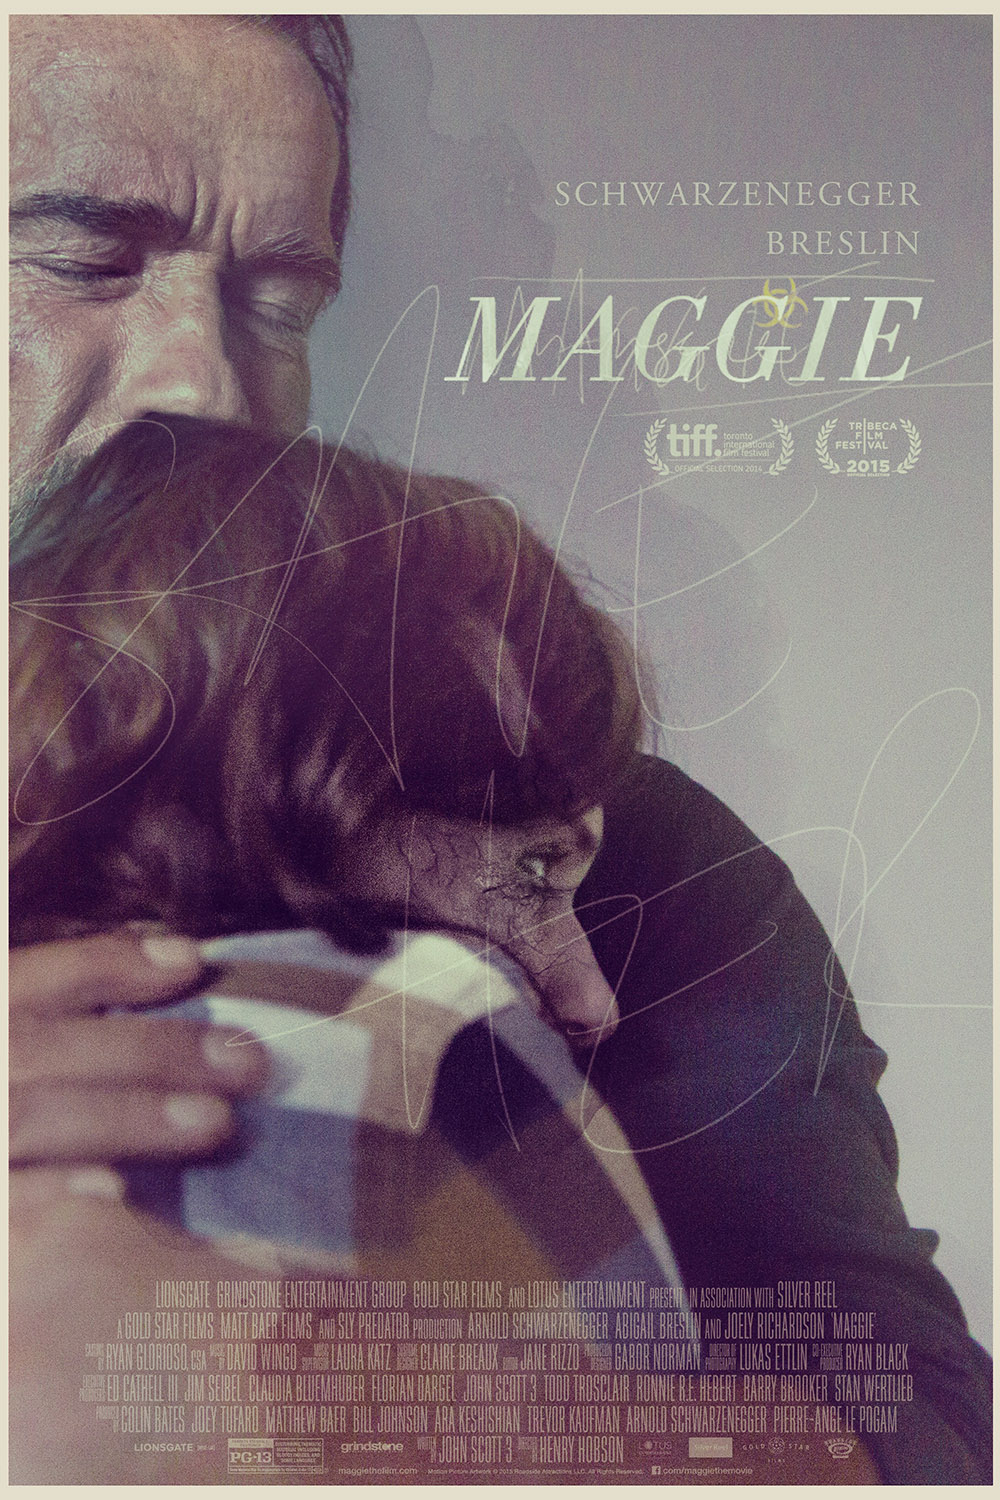 Maggie (2015) Poster